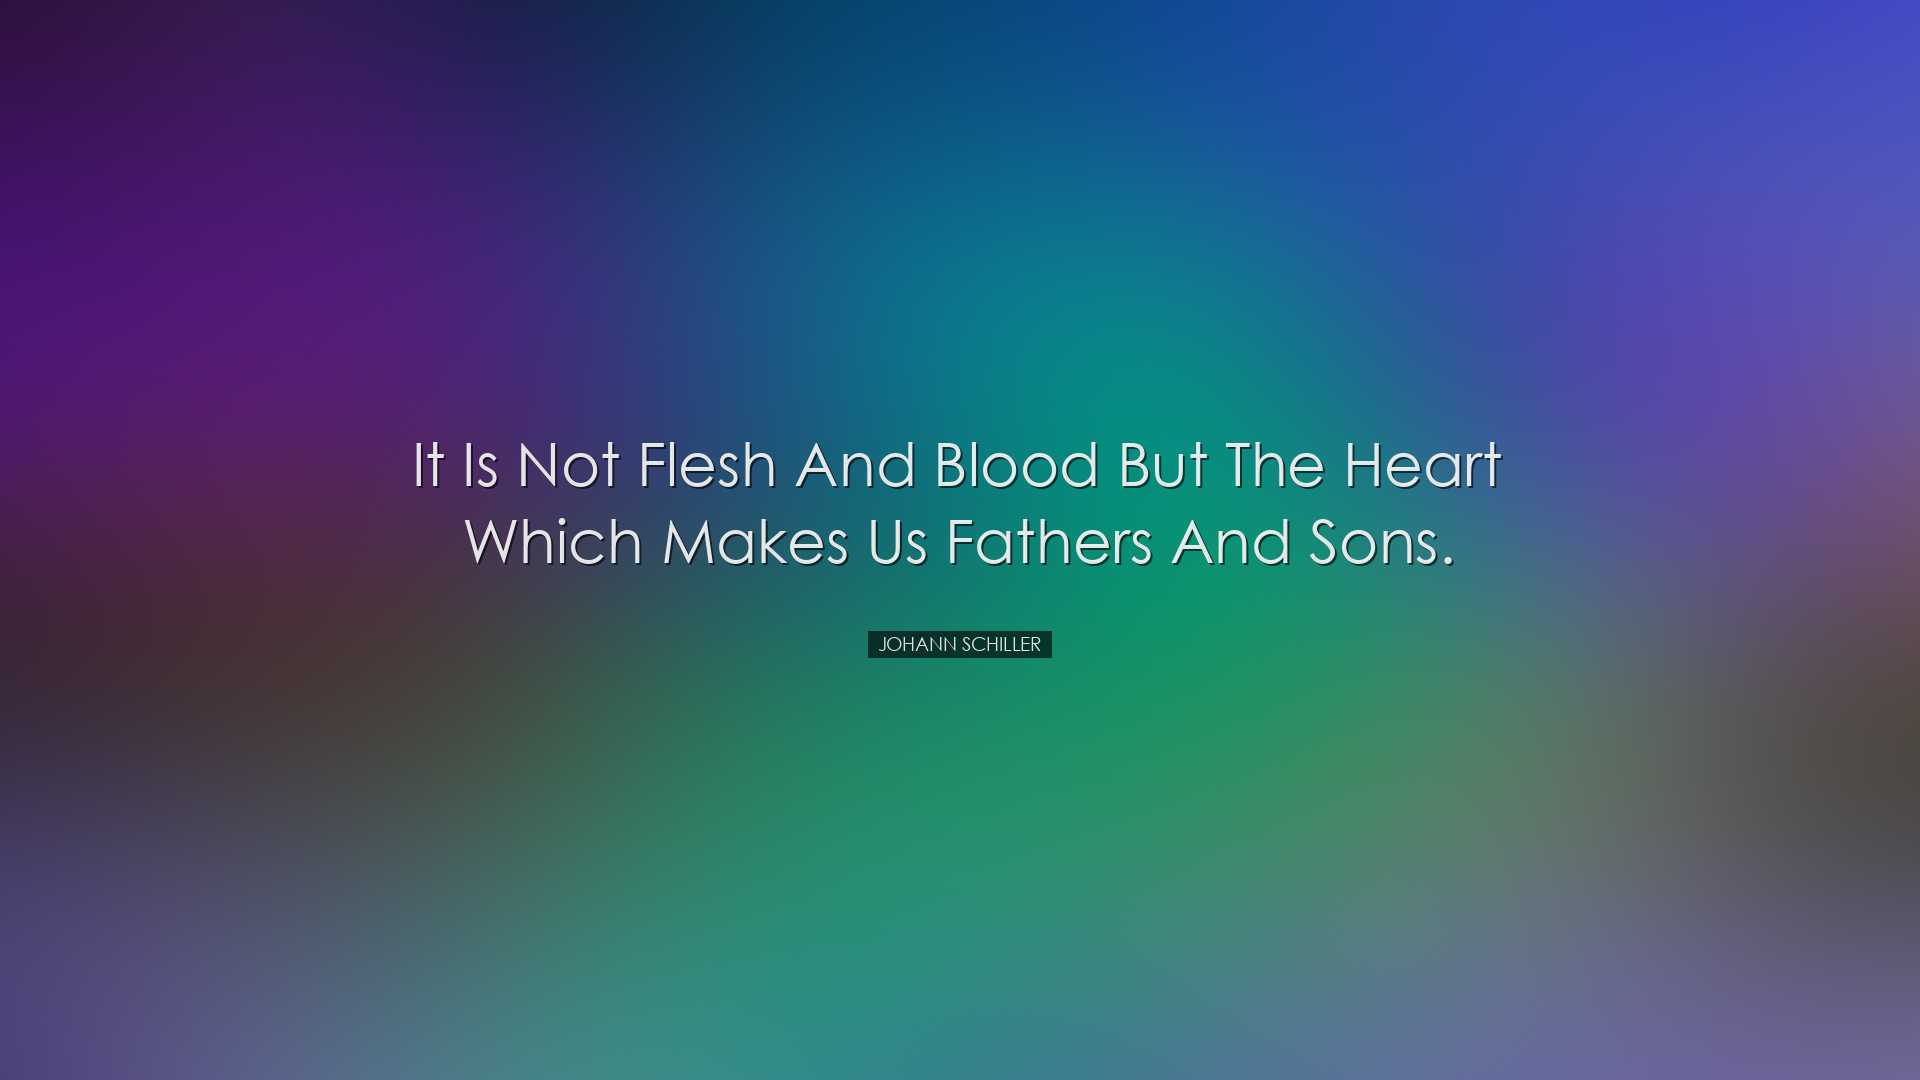 It is not flesh and blood but the heart which makes us fathers and